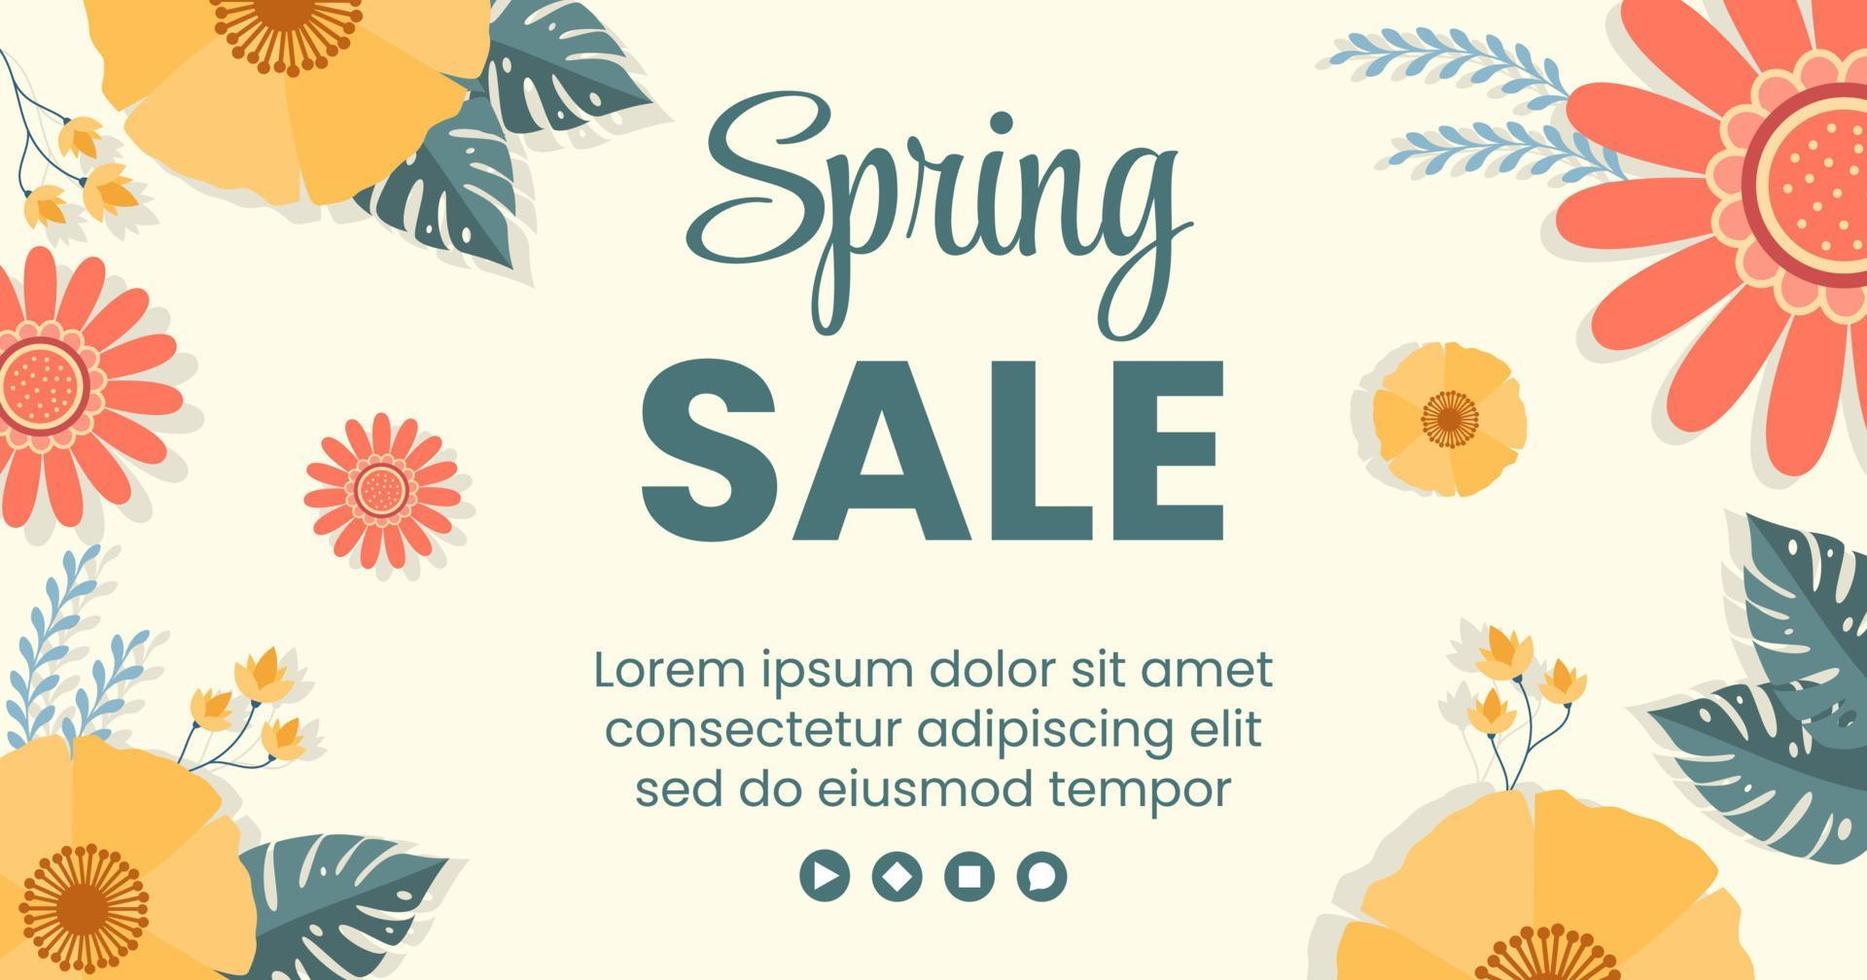 Spring Sale with Blossom Flowers Post Template Flat Illustration Editable of Square Background for Social Media or Greeting Card vector